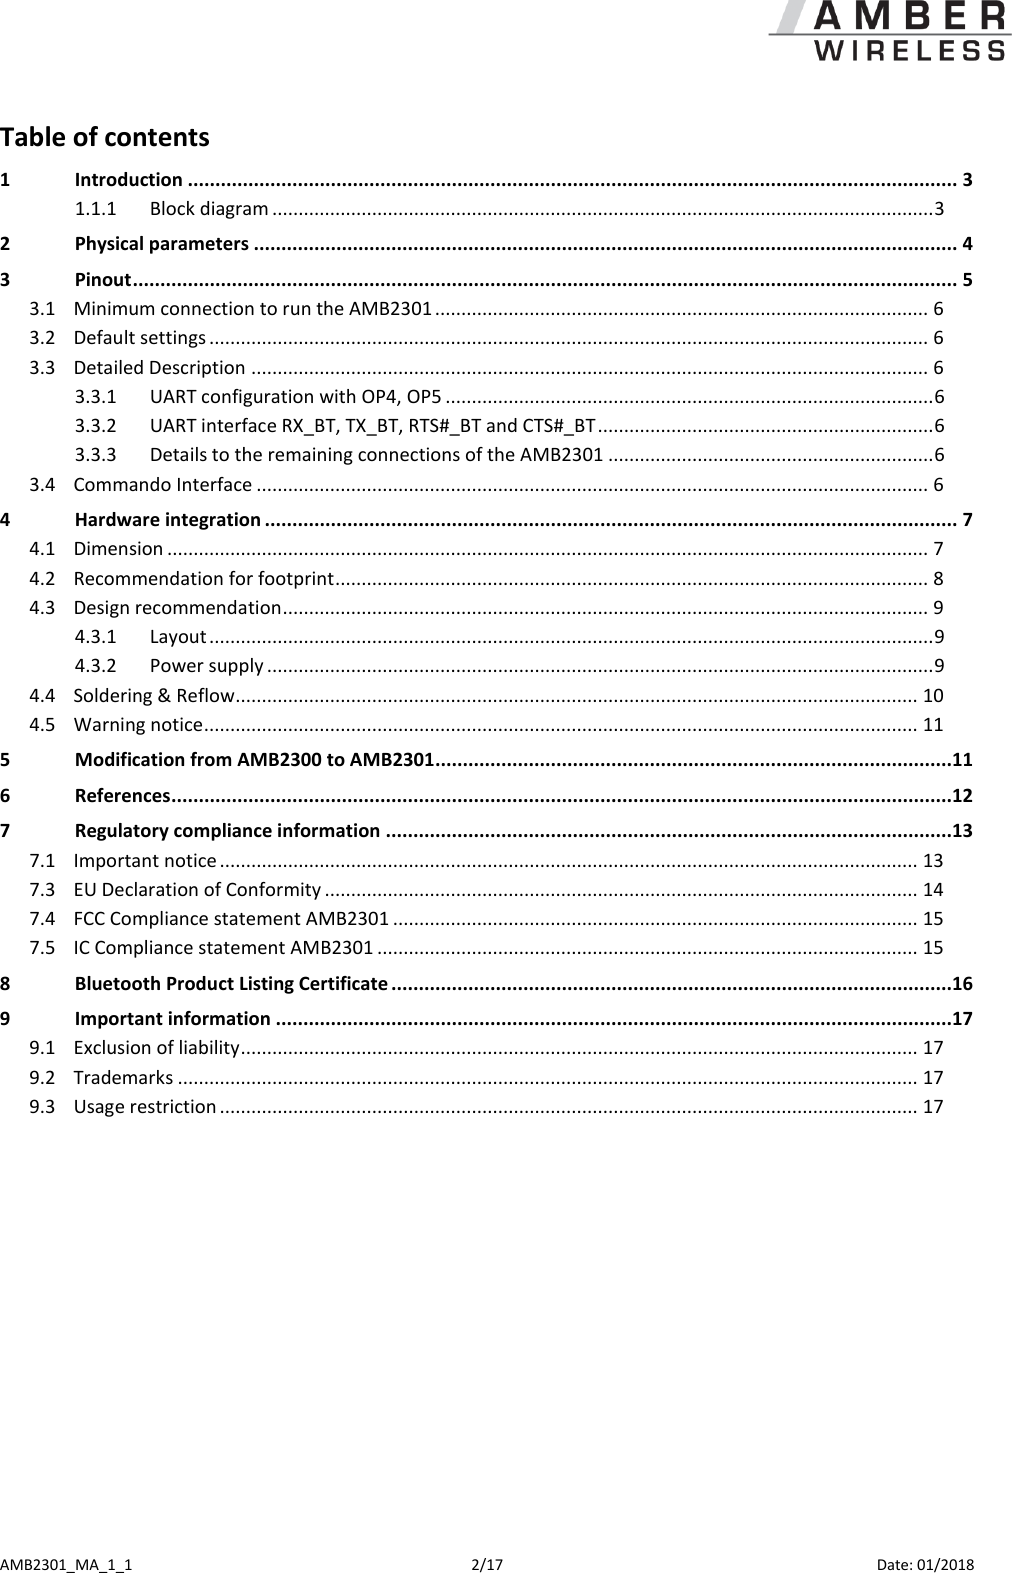  AMB2301_MA_1_1  2/17     Date: 01/2018 Table of contents 1 Introduction ............................................................................................................................................ 3 1.1.1 Block diagram .............................................................................................................................. 3 2 Physical parameters ................................................................................................................................ 4 3 Pinout ...................................................................................................................................................... 5 3.1 Minimum connection to run the AMB2301 .............................................................................................. 6 3.2 Default settings ......................................................................................................................................... 6 3.3 Detailed Description ................................................................................................................................. 6 3.3.1 UART configuration with OP4, OP5 ............................................................................................. 6 3.3.2 UART interface RX_BT, TX_BT, RTS#_BT and CTS#_BT ................................................................ 6 3.3.3 Details to the remaining connections of the AMB2301 .............................................................. 6 3.4 Commando Interface ................................................................................................................................ 6 4 Hardware integration .............................................................................................................................. 7 4.1 Dimension ................................................................................................................................................. 7 4.2 Recommendation for footprint ................................................................................................................. 8 4.3 Design recommendation ........................................................................................................................... 9 4.3.1 Layout .......................................................................................................................................... 9 4.3.2 Power supply ............................................................................................................................... 9 4.4 Soldering &amp; Reflow.................................................................................................................................. 10 4.5 Warning notice ........................................................................................................................................ 11 5 Modification from AMB2300 to AMB2301..............................................................................................11 6 References ..............................................................................................................................................12 7 Regulatory compliance information .......................................................................................................13 7.1 Important notice ..................................................................................................................................... 13 7.3 EU Declaration of Conformity ................................................................................................................. 14 7.4 FCC Compliance statement AMB2301 .................................................................................................... 15 7.5 IC Compliance statement AMB2301 ....................................................................................................... 15 8 Bluetooth Product Listing Certificate ......................................................................................................16 9 Important information ...........................................................................................................................17 9.1 Exclusion of liability ................................................................................................................................. 17 9.2 Trademarks ............................................................................................................................................. 17 9.3 Usage restriction ..................................................................................................................................... 17  